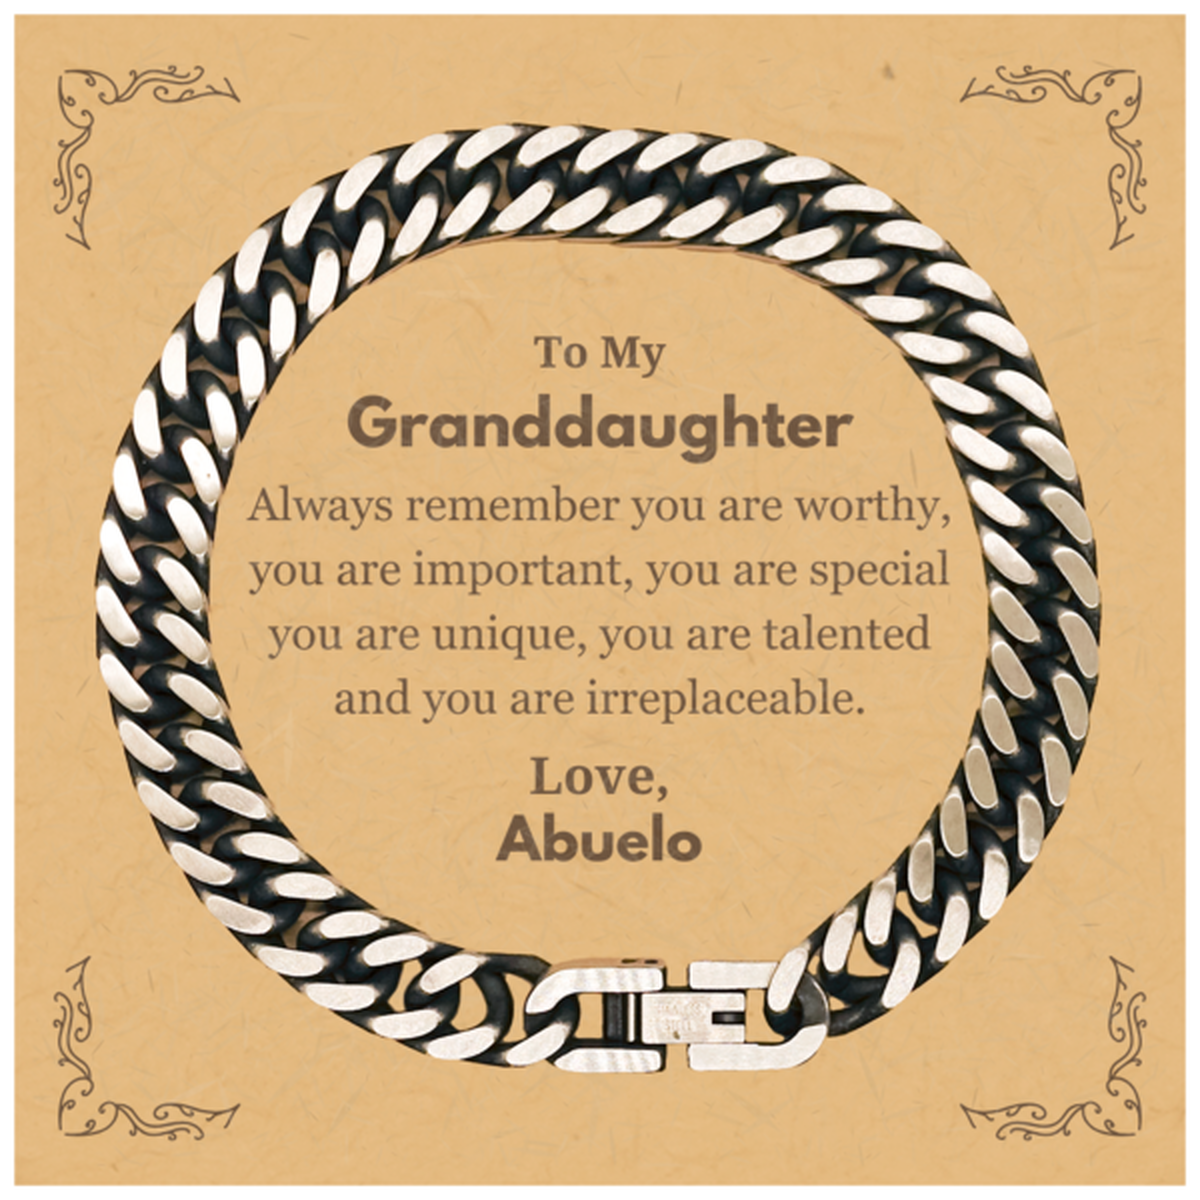 Granddaughter Birthday Gifts from Abuelo, Inspirational Cuban Link Chain Bracelet for Granddaughter Christmas Graduation Gifts for Granddaughter Always remember you are worthy, you are important. Love, Abuelo